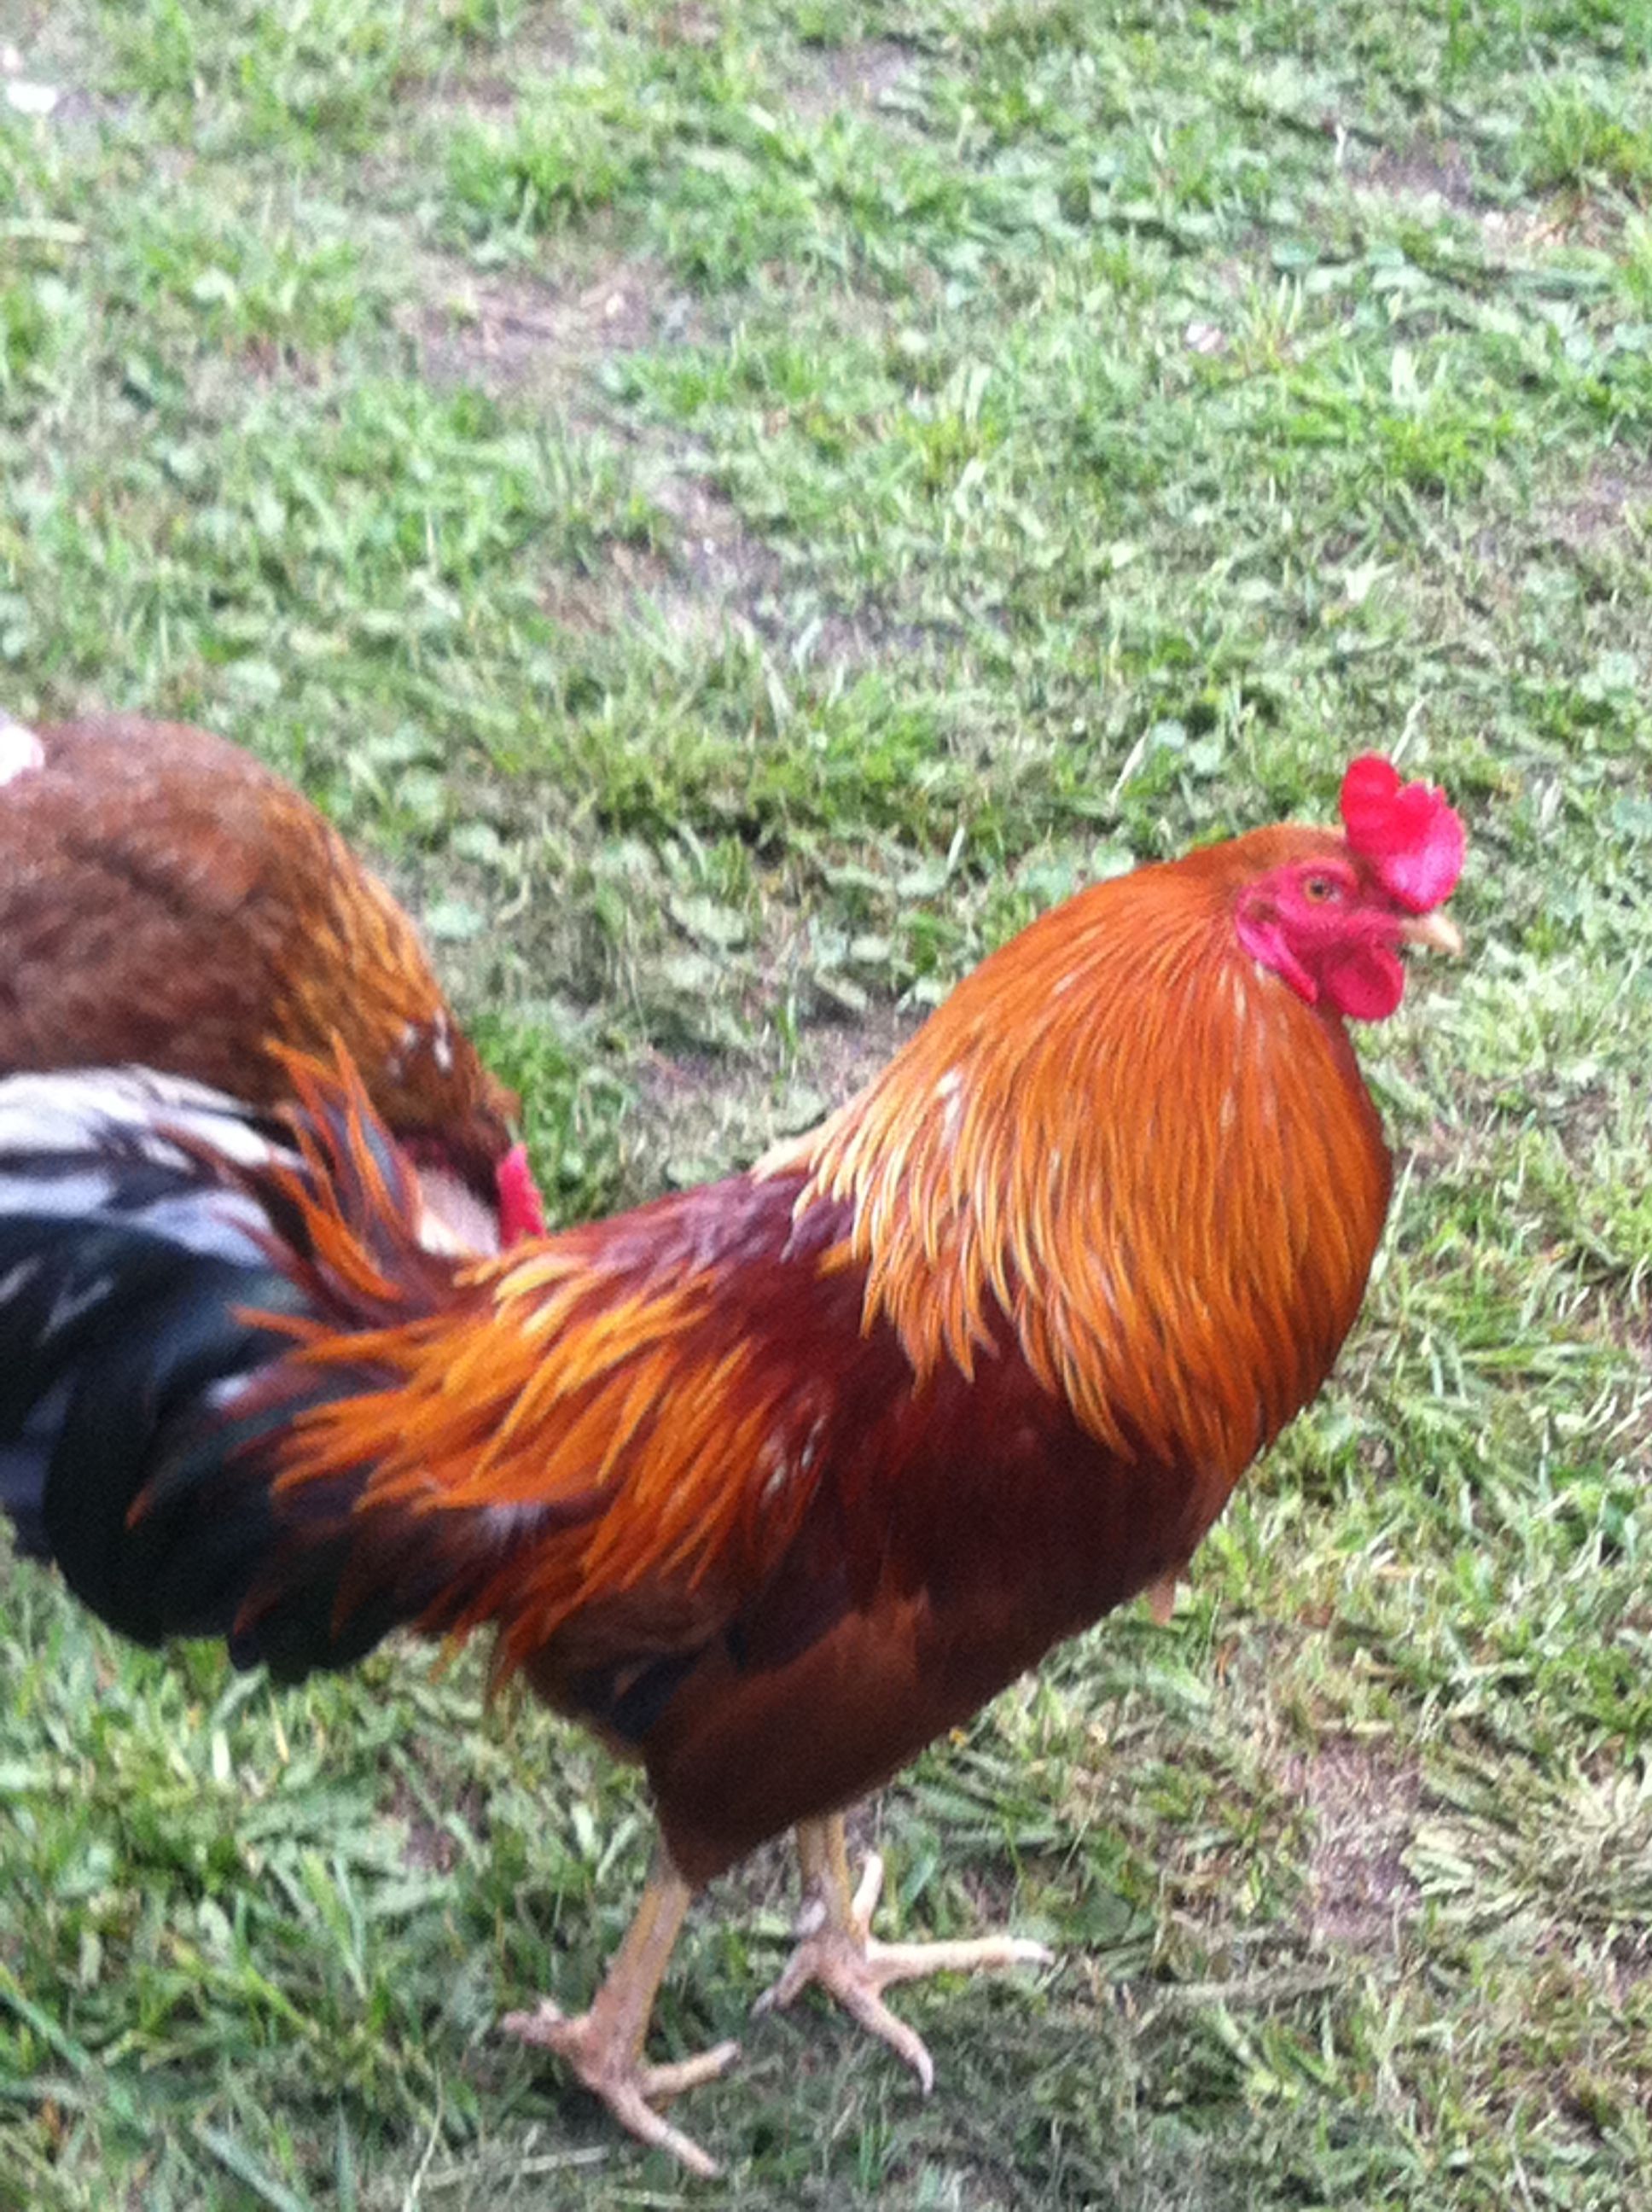 this is Cecil, my first rooster from my original 5 chicks that I got in 2013.